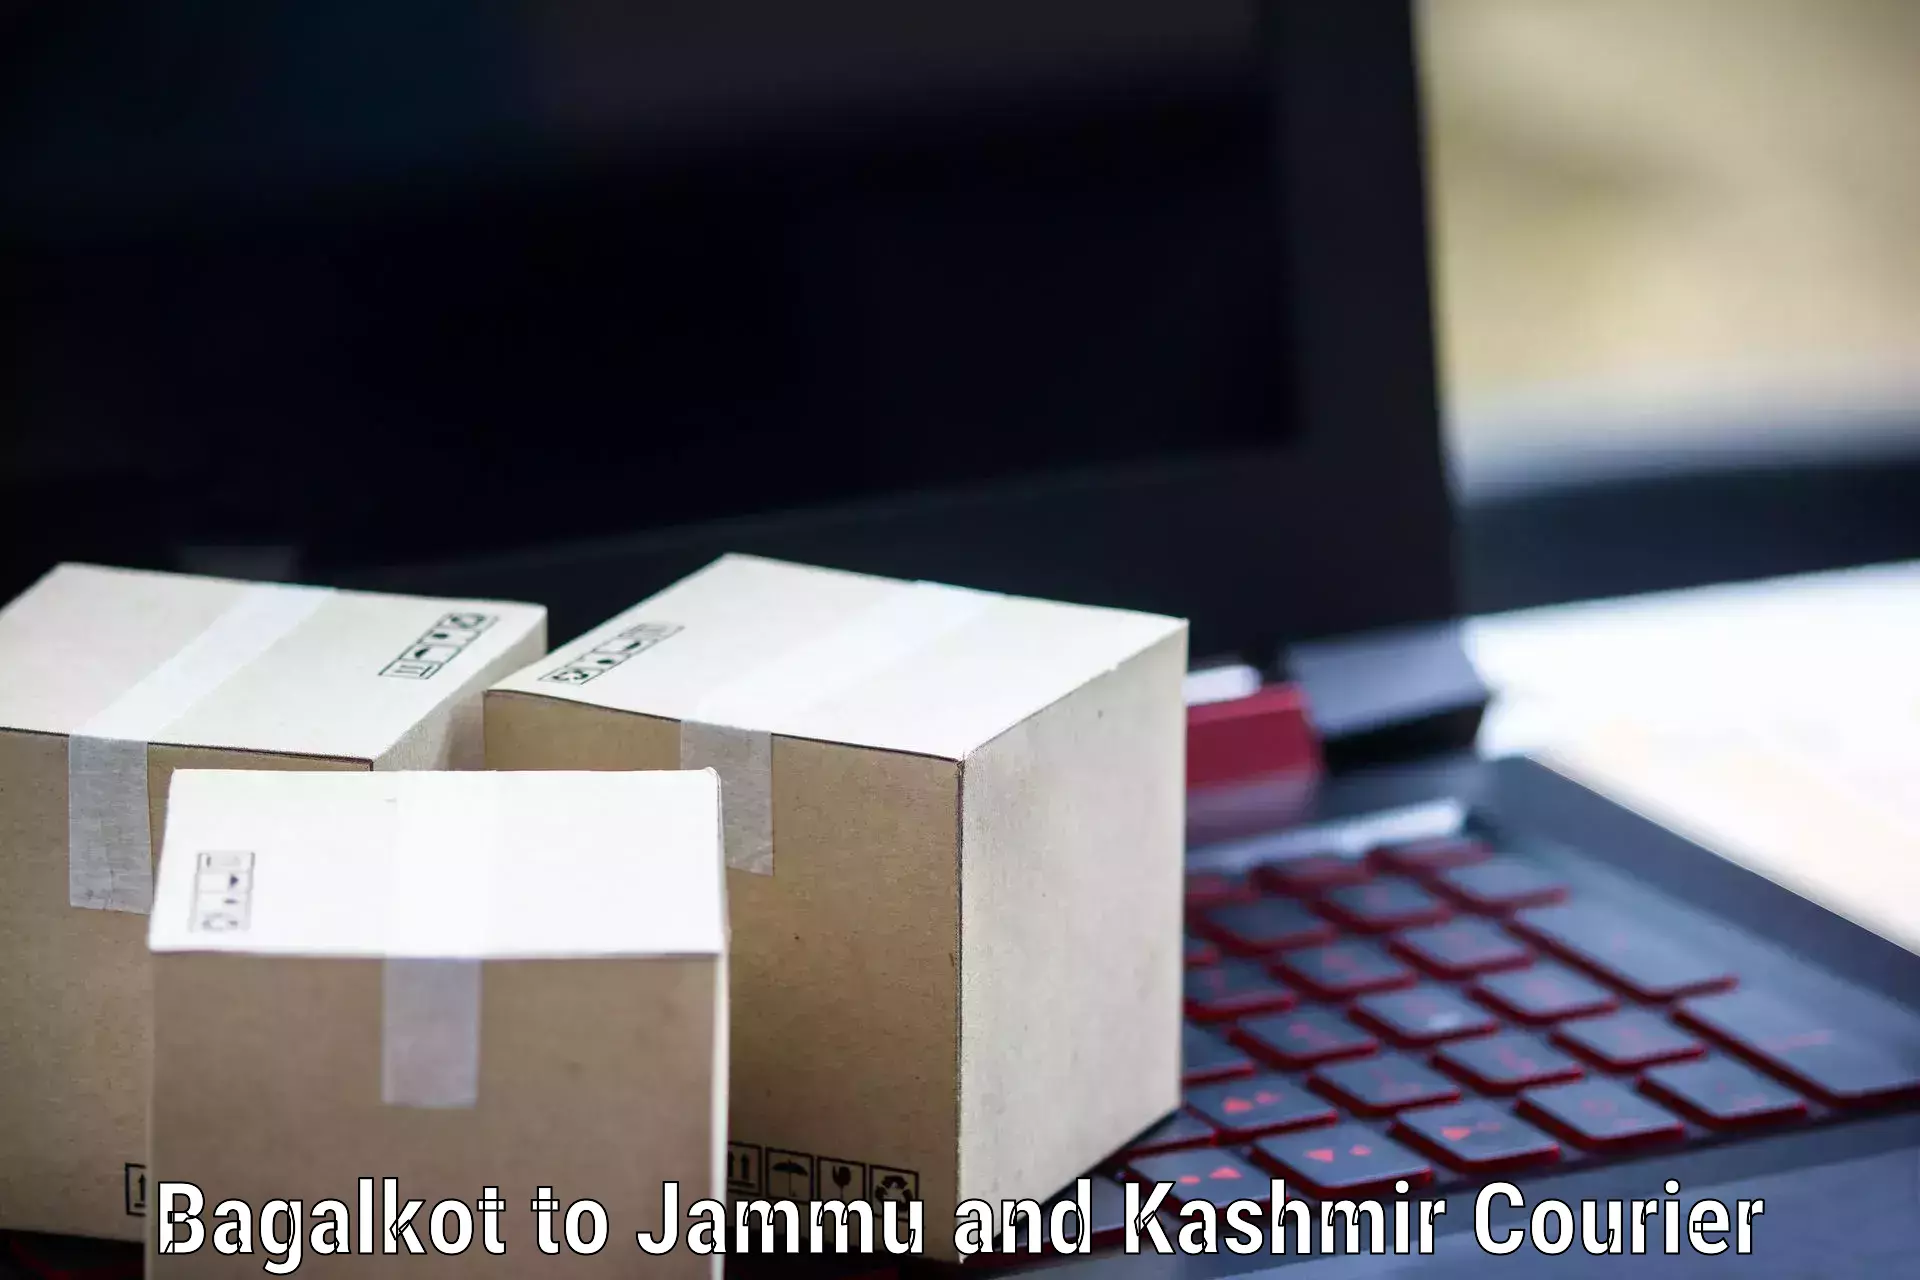 Courier service comparison in Bagalkot to University of Jammu